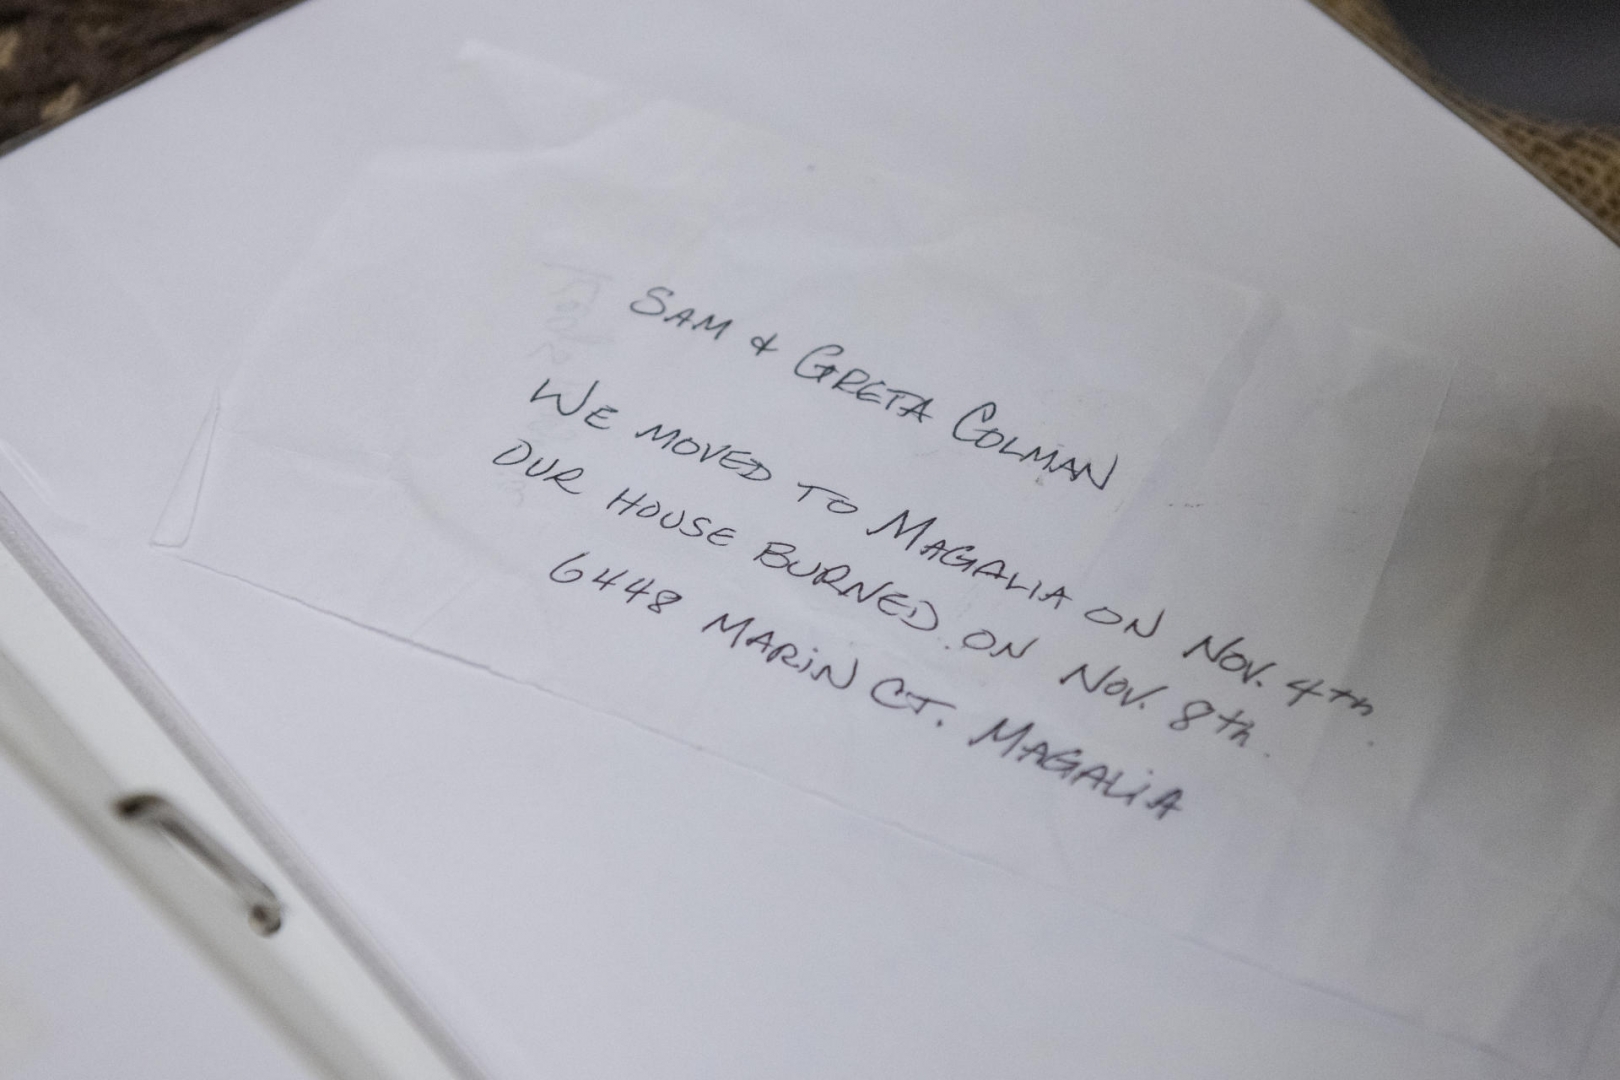 A hand-written note in a photo album says "We moved to Magalia on Nov. 4th. Our house burned on Nov. 8."